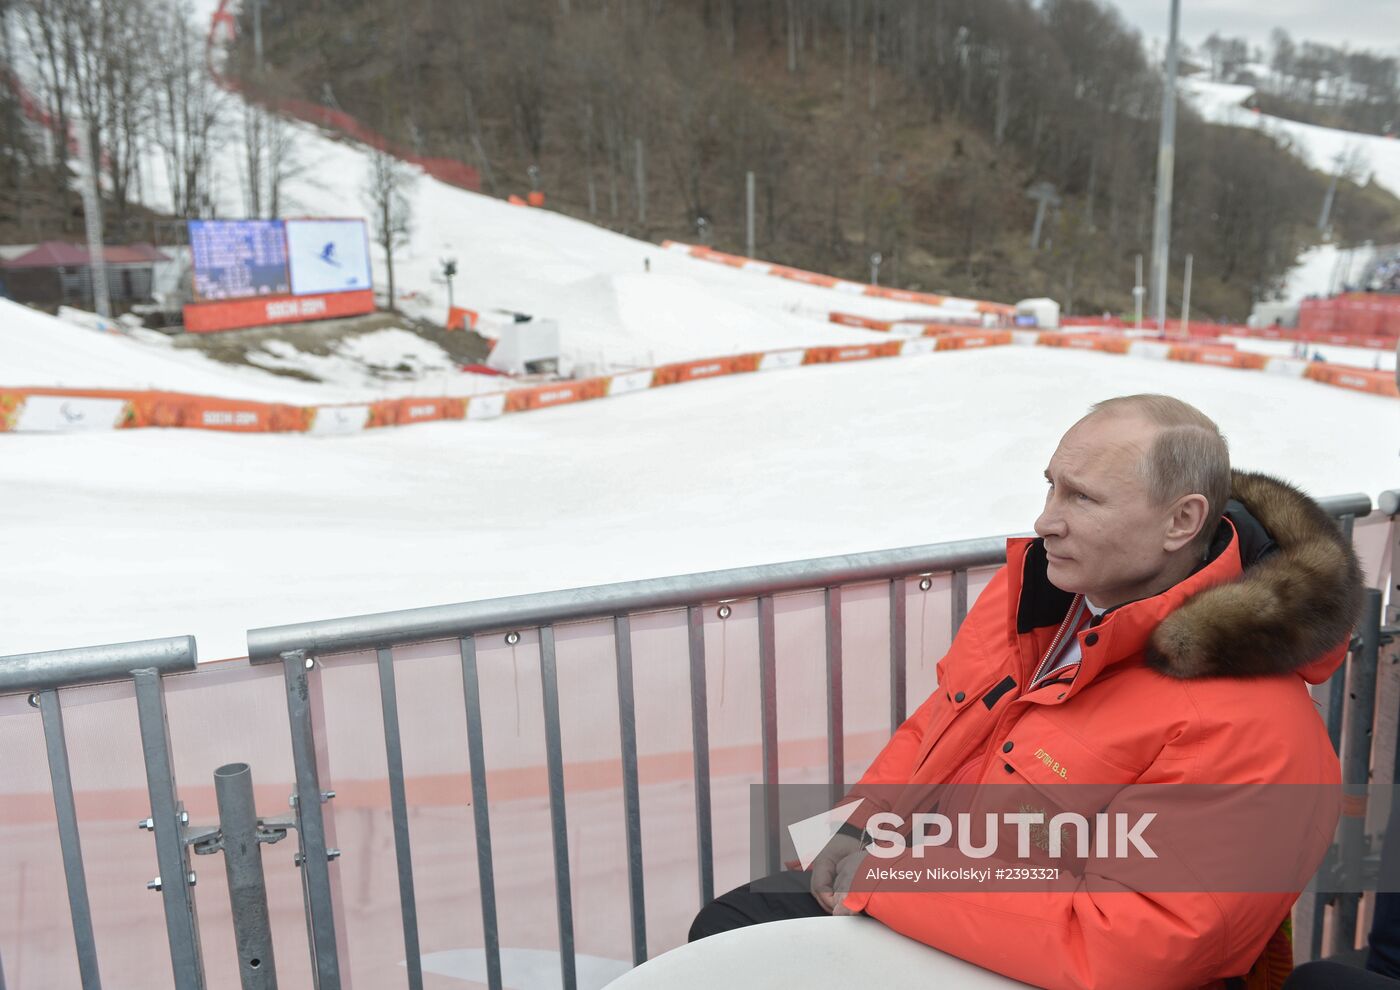 Vladimir Putin attends paralympic Alpine skiing competitions